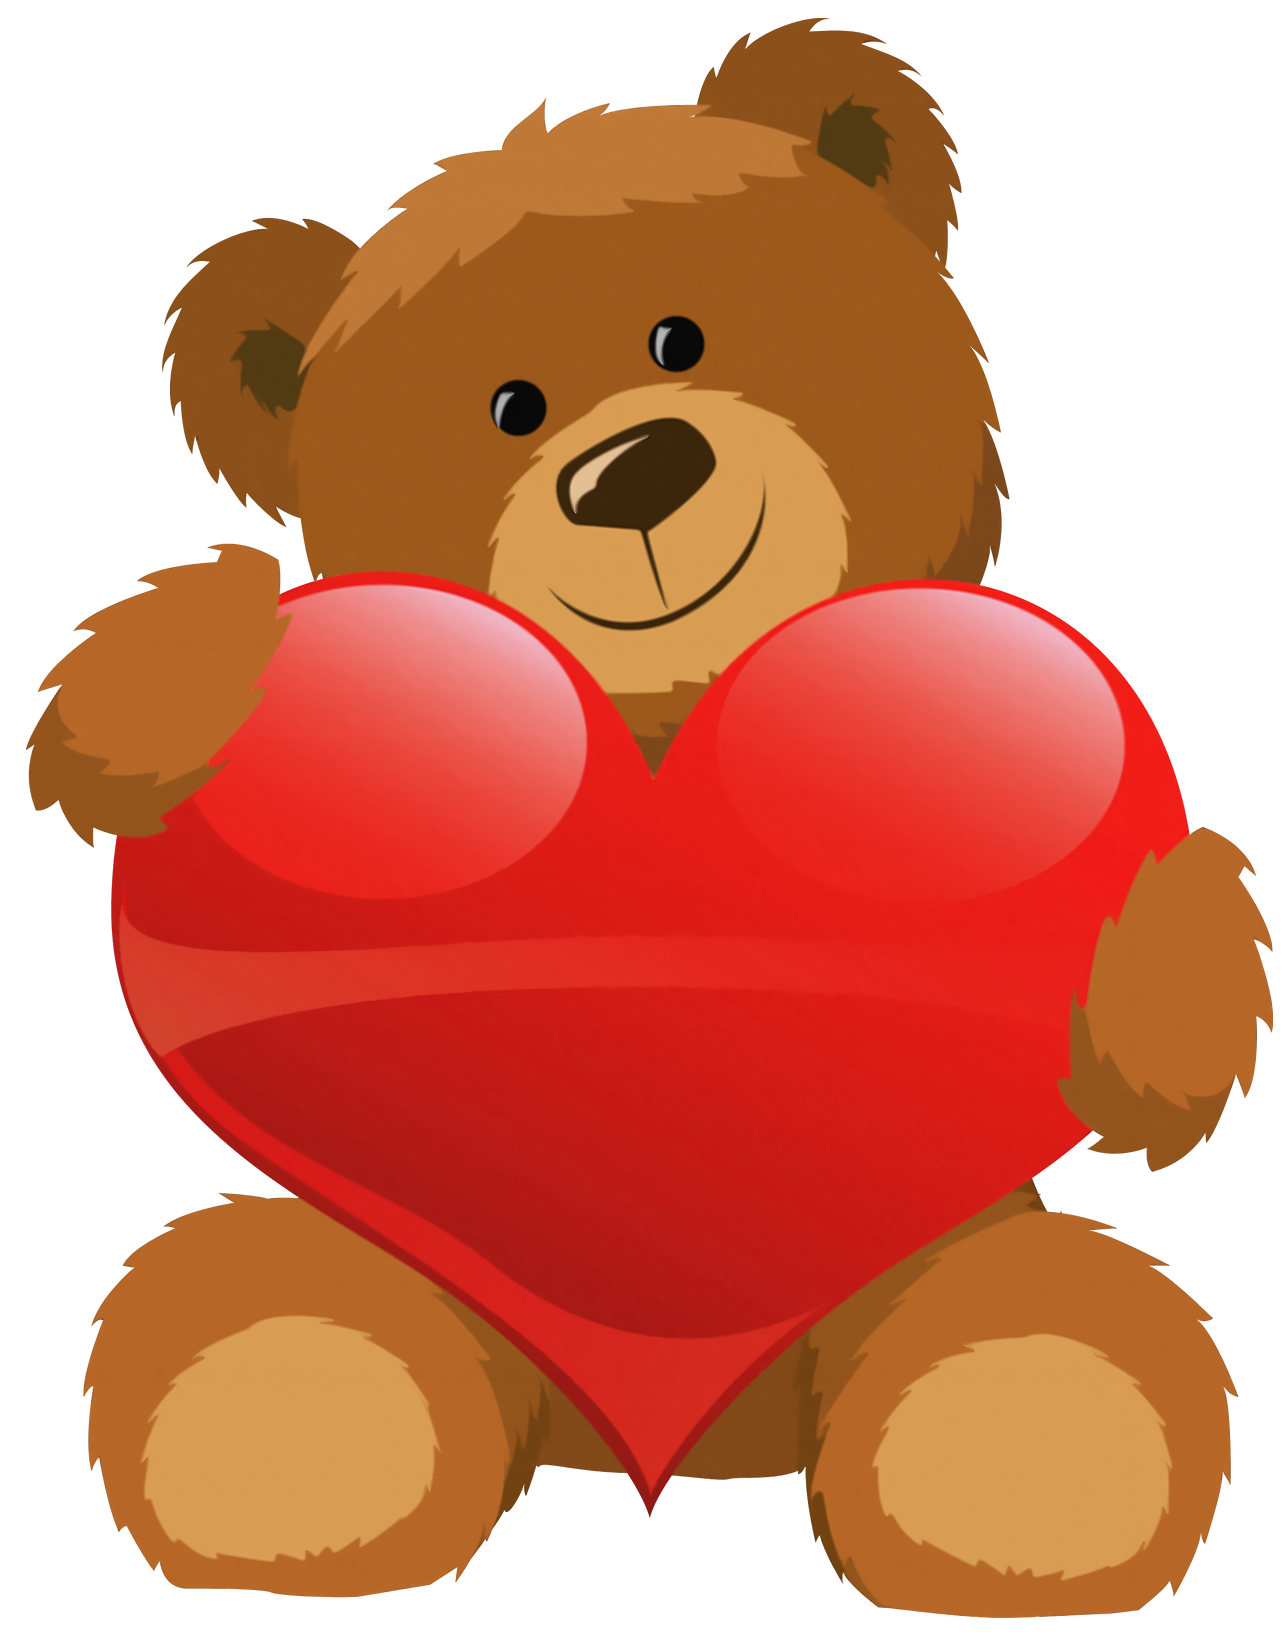 Bear With Heart PNG HD Quality